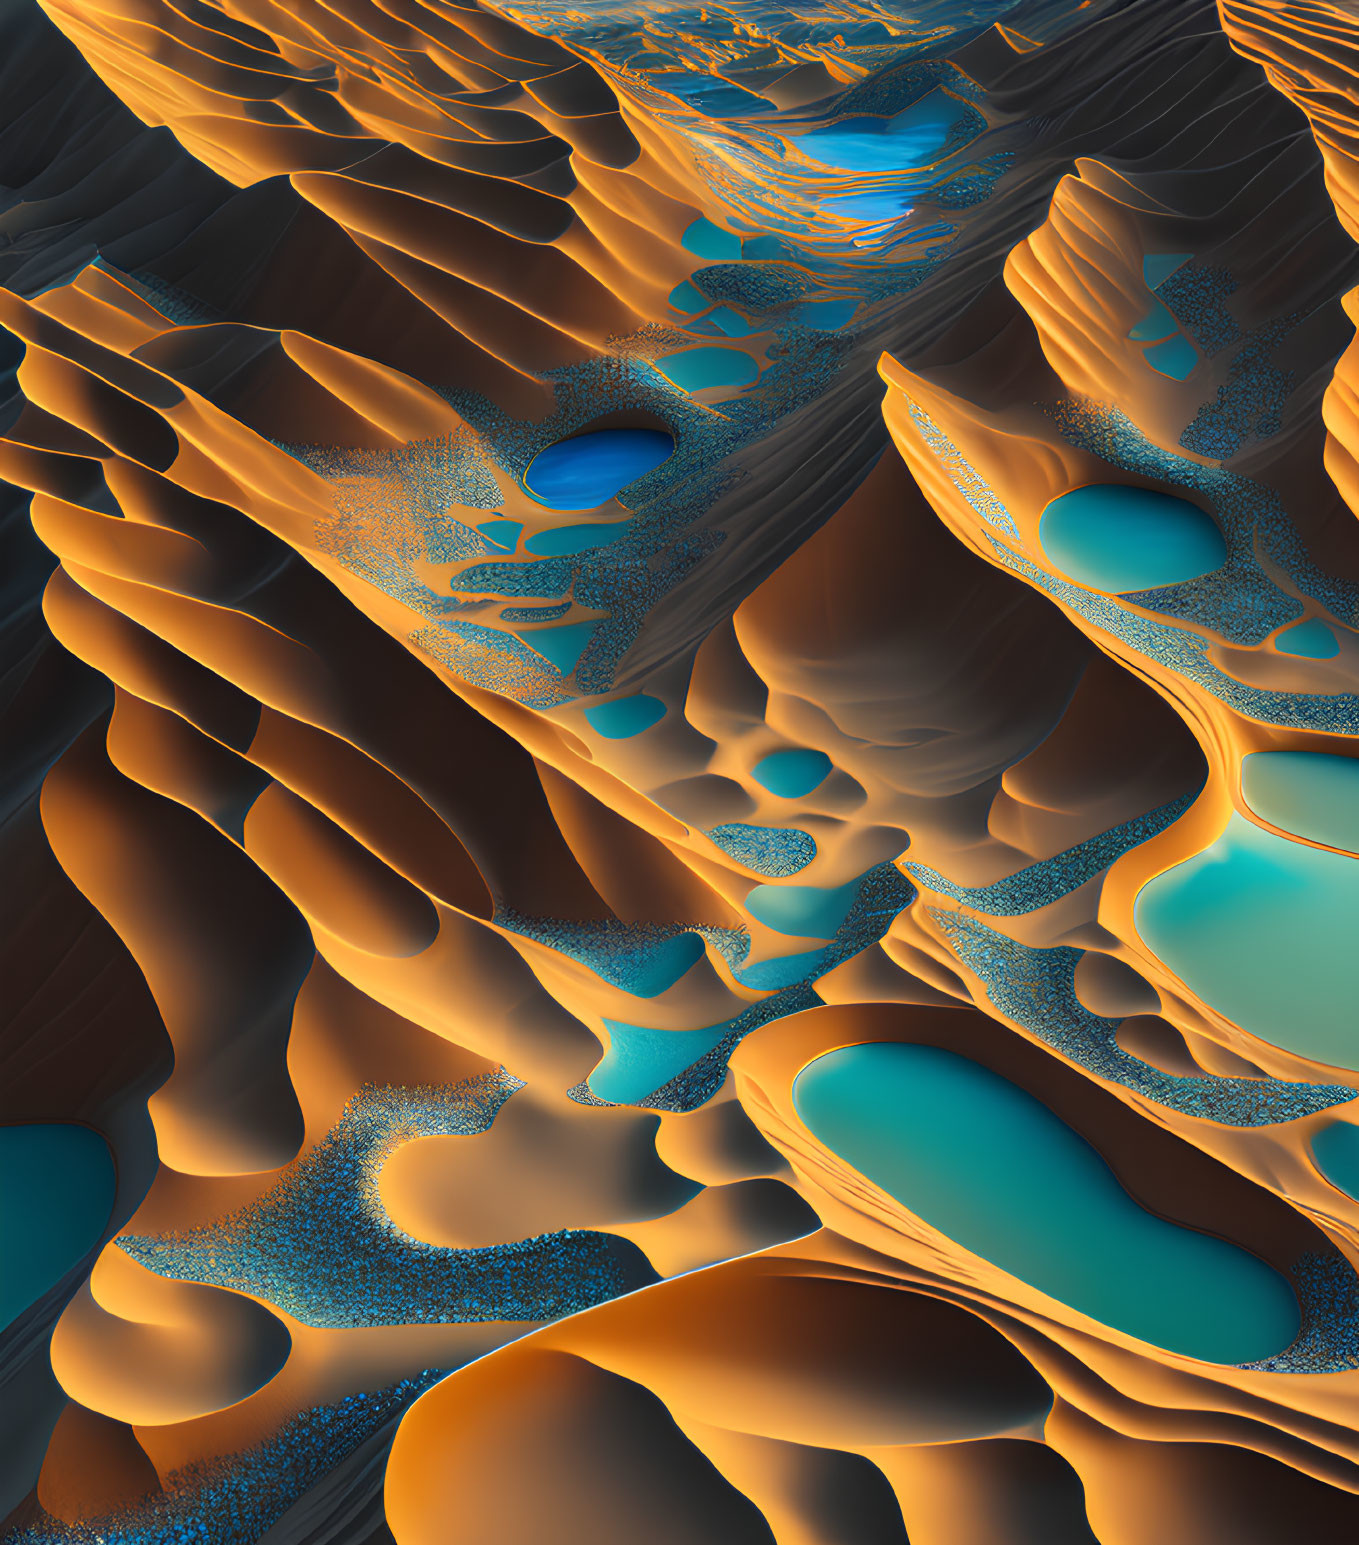 3D Fractal Landscape with Layered Structures and Water Pools in Orange and Blue Hues